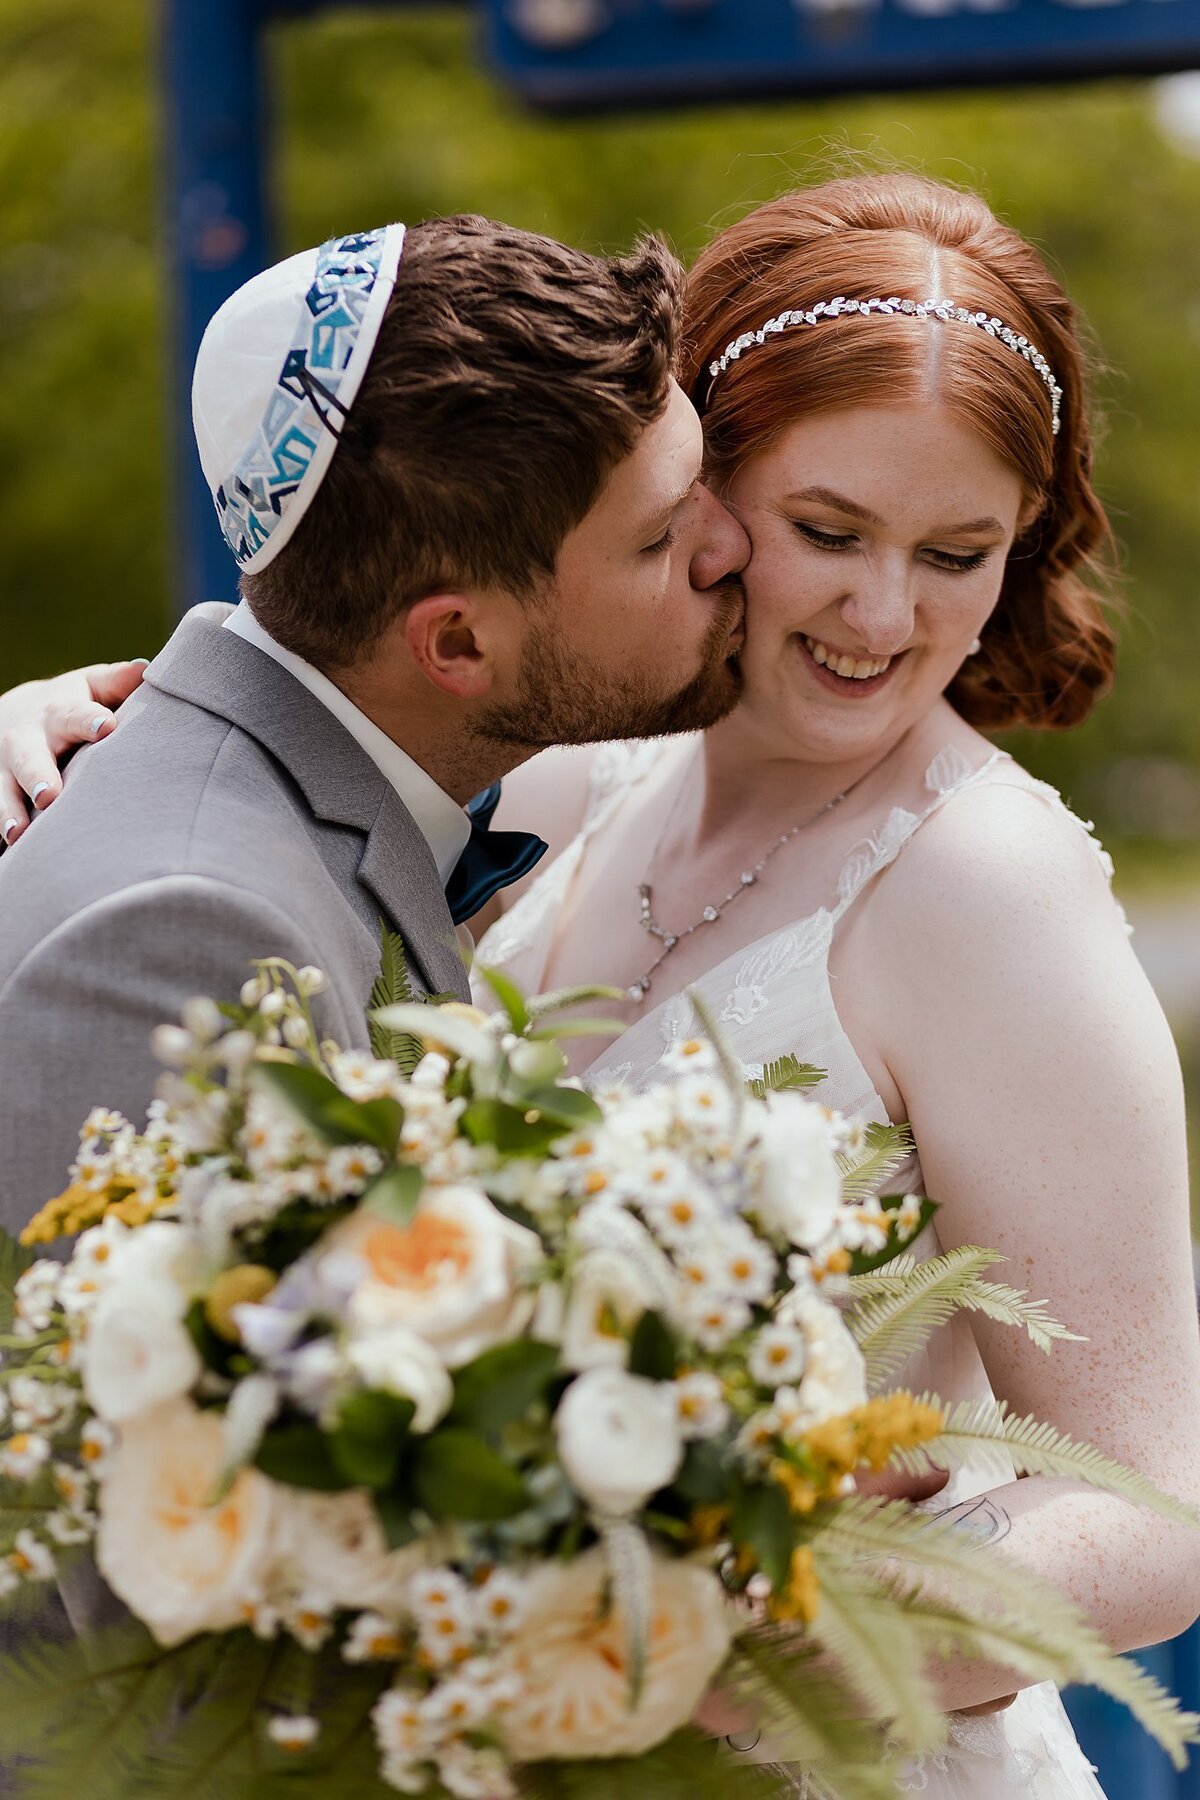 A redheaded bride wearing a v-necked white floral wedding dress holding a large bouquet of white and yellow wildflowers and fern as she laughs. The Jewish groom wearing a blue and white kippot and grey suit leans in to kiss the bride's cheek at their Jewish Wedding in Nashville, TN at Loveless Barn